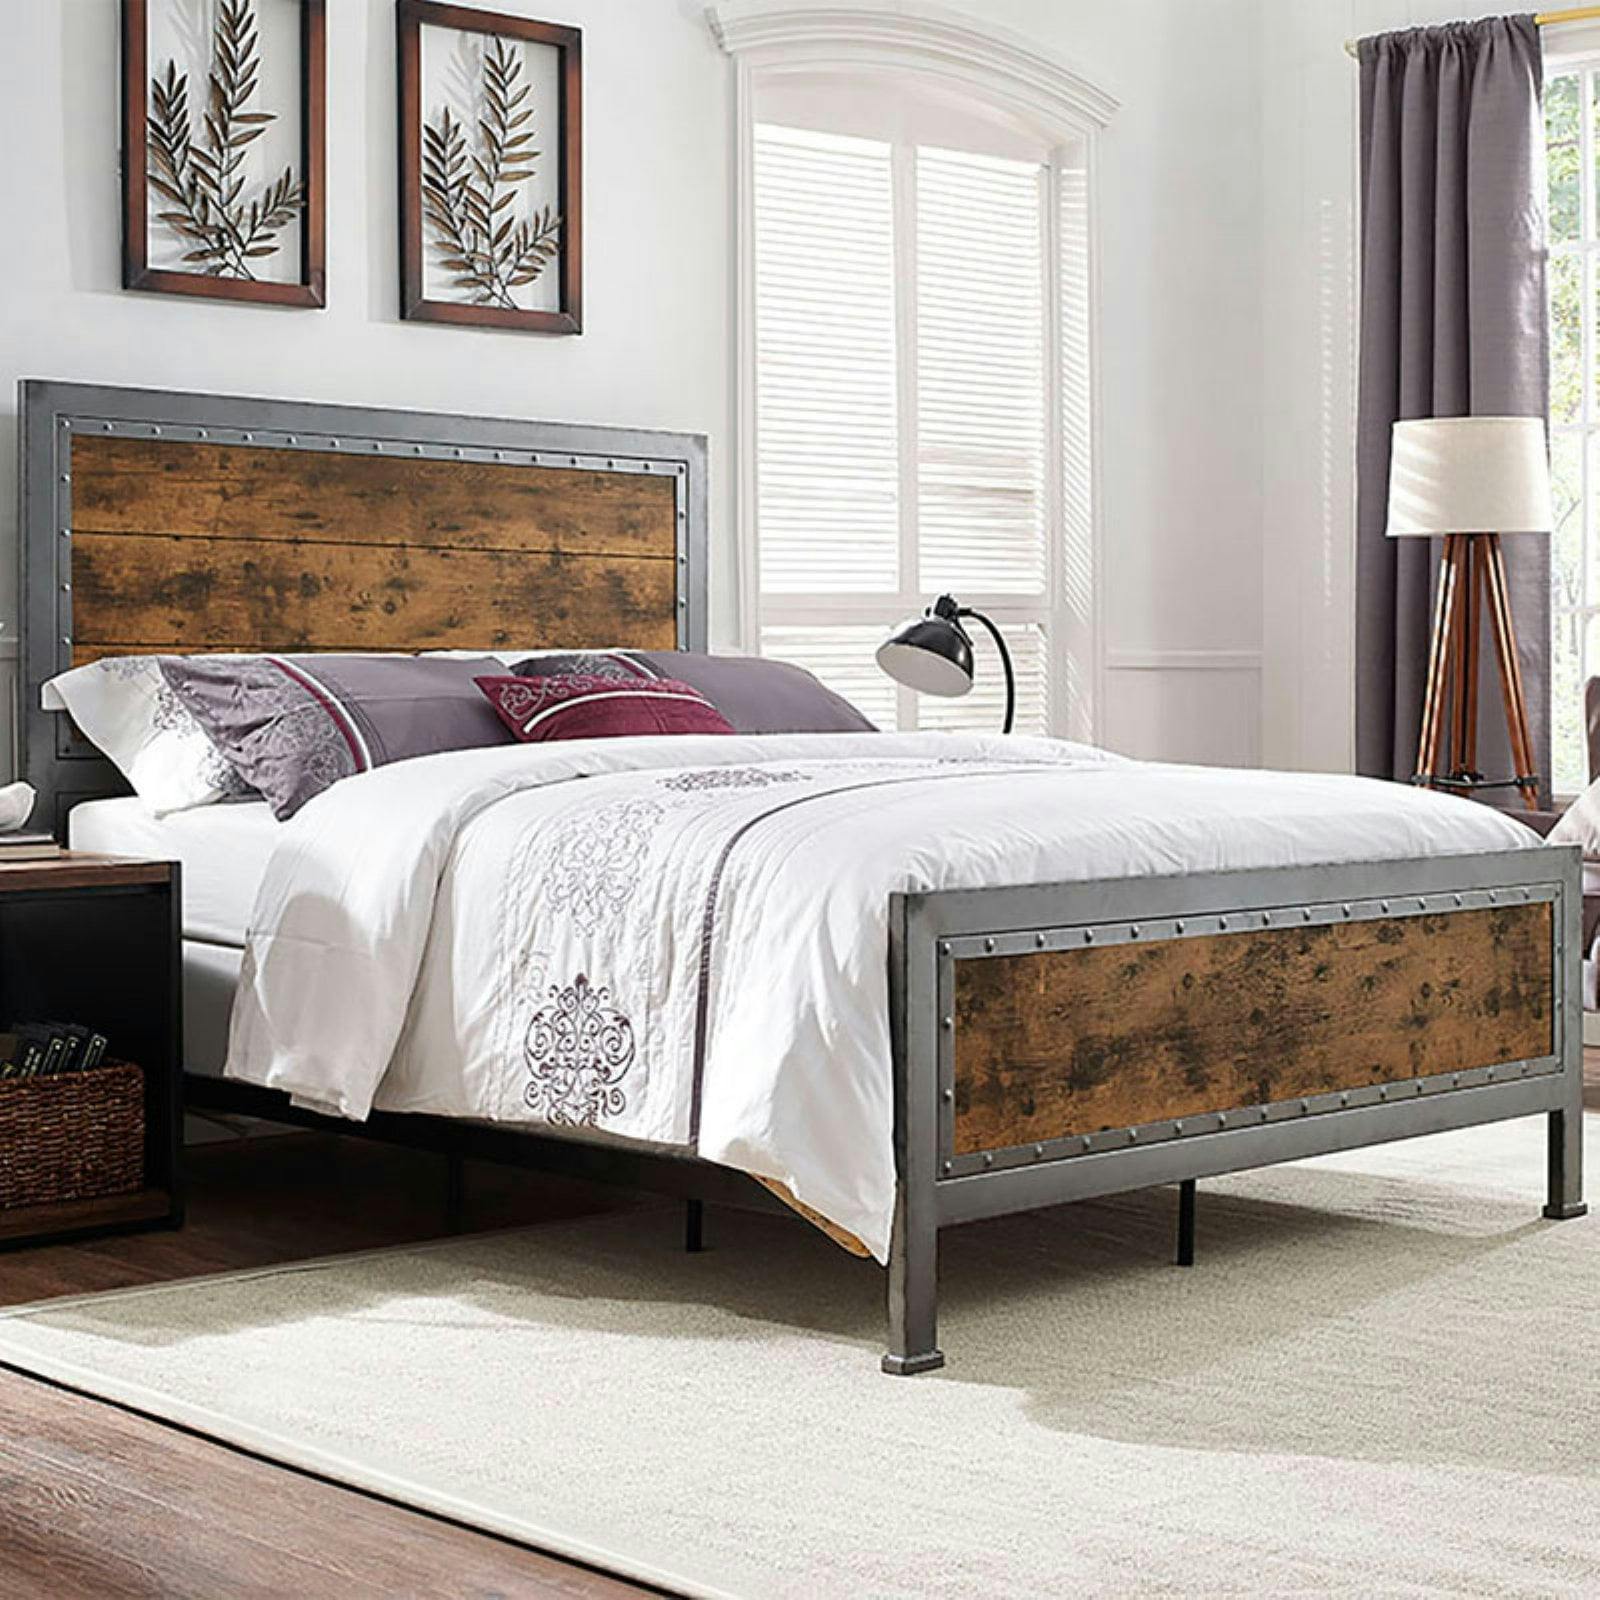 Rustic Industrial Queen Bed with Wood Headboard and Nailhead Trim